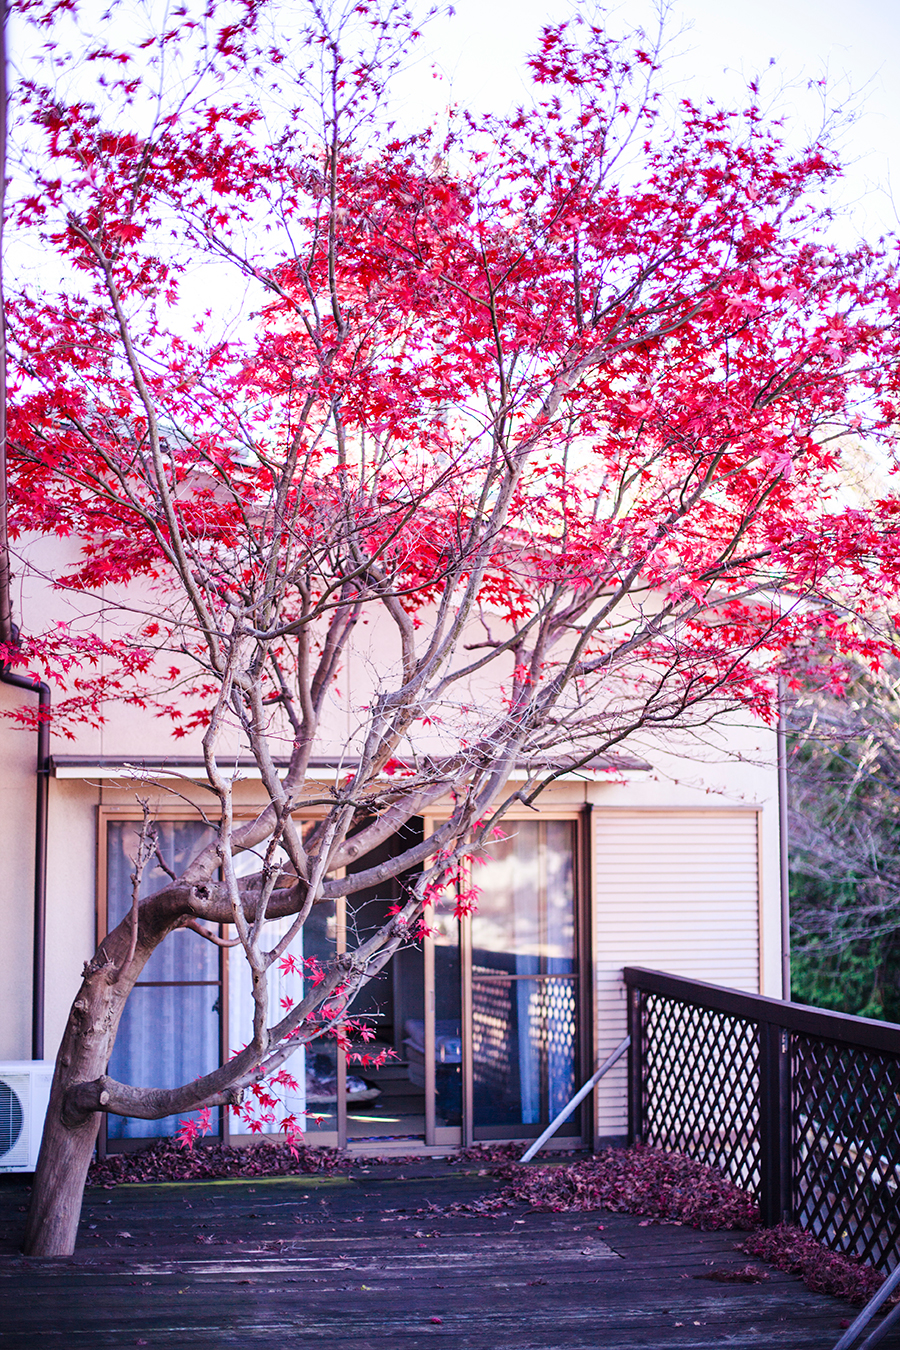 Red maple leaves from momiji at our Kyoto Airbnb.